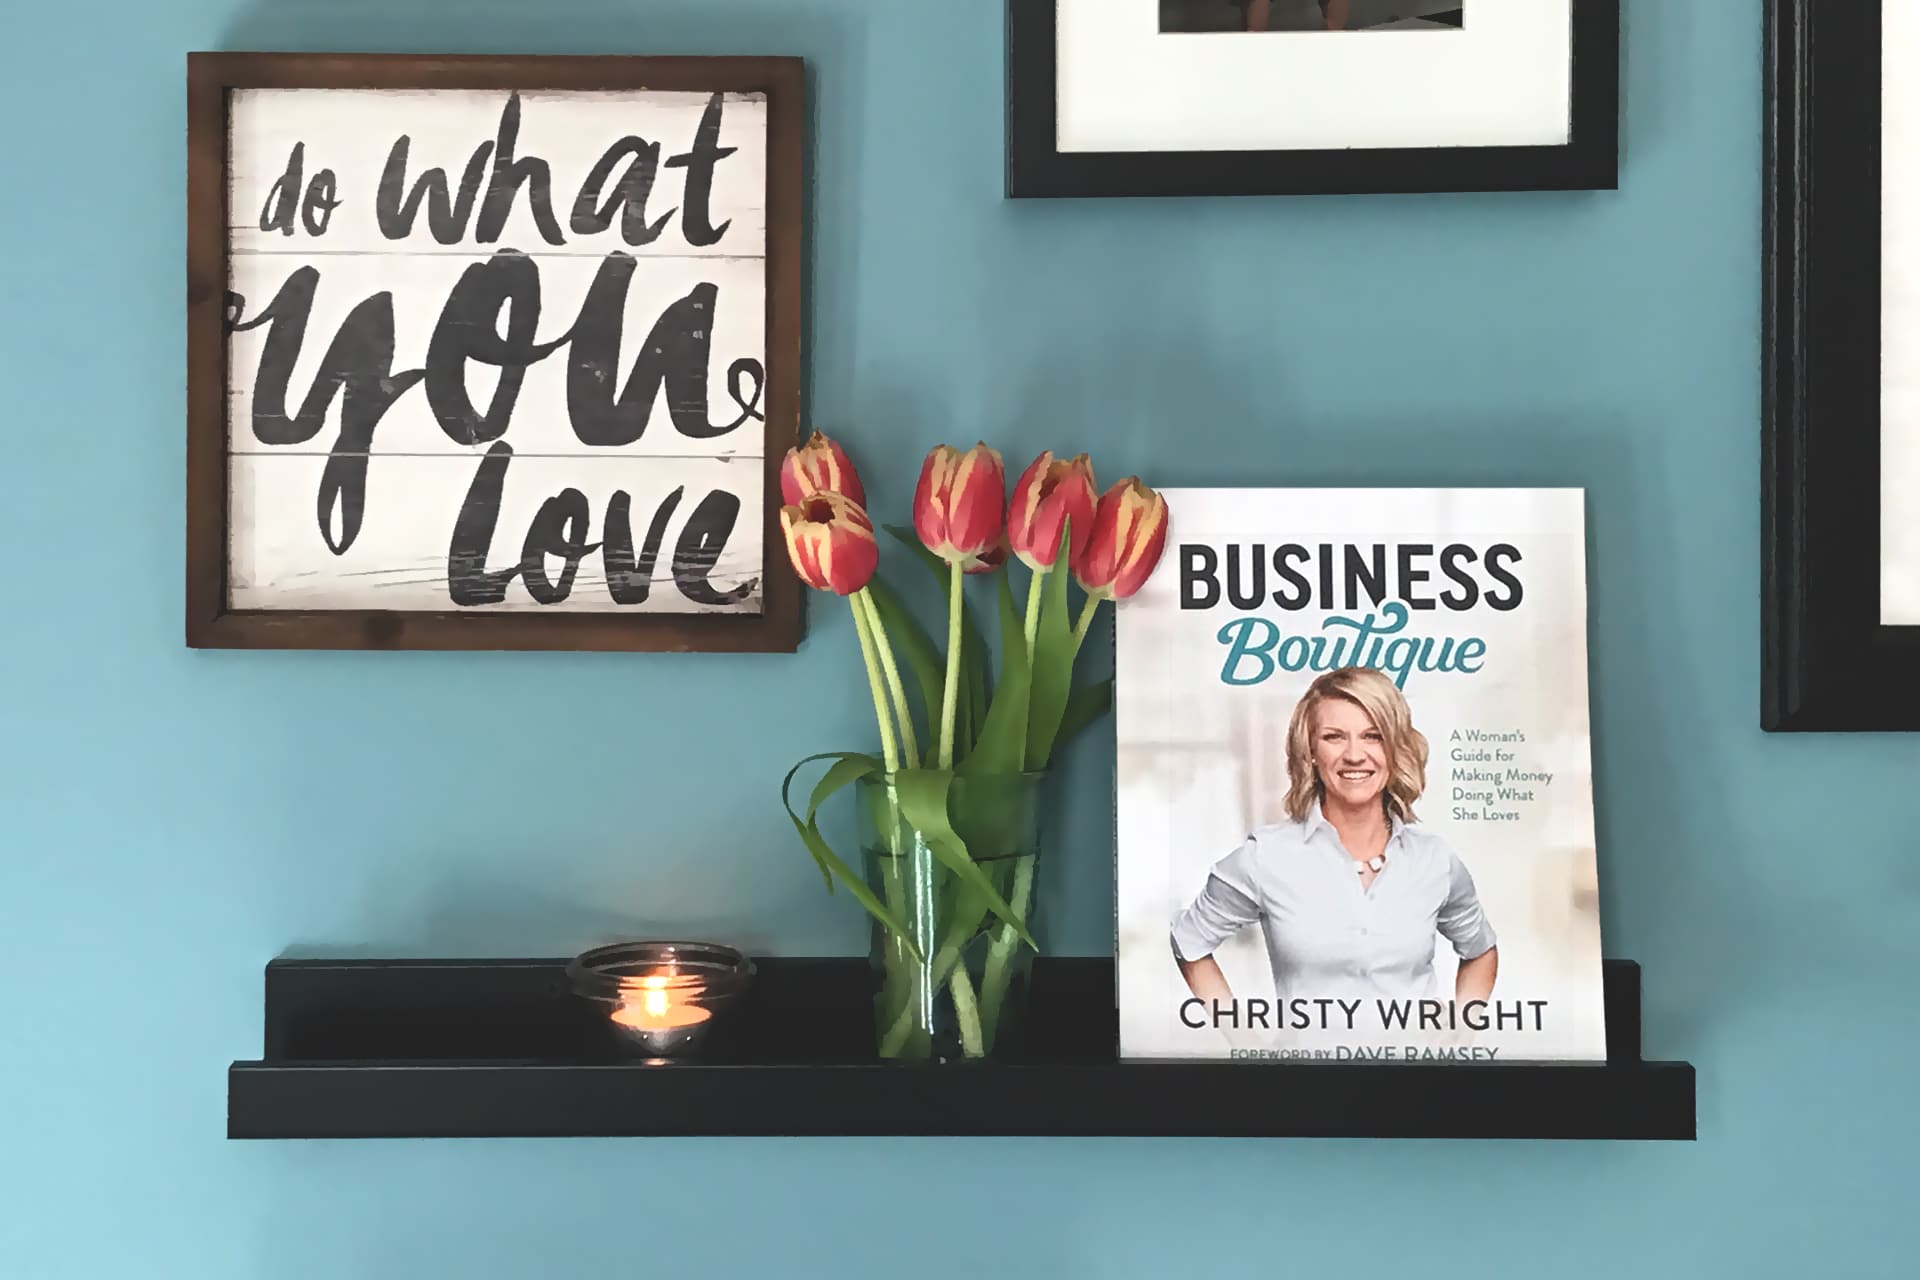 How to Make Money Doing What You Love – Business Boutique Book Review